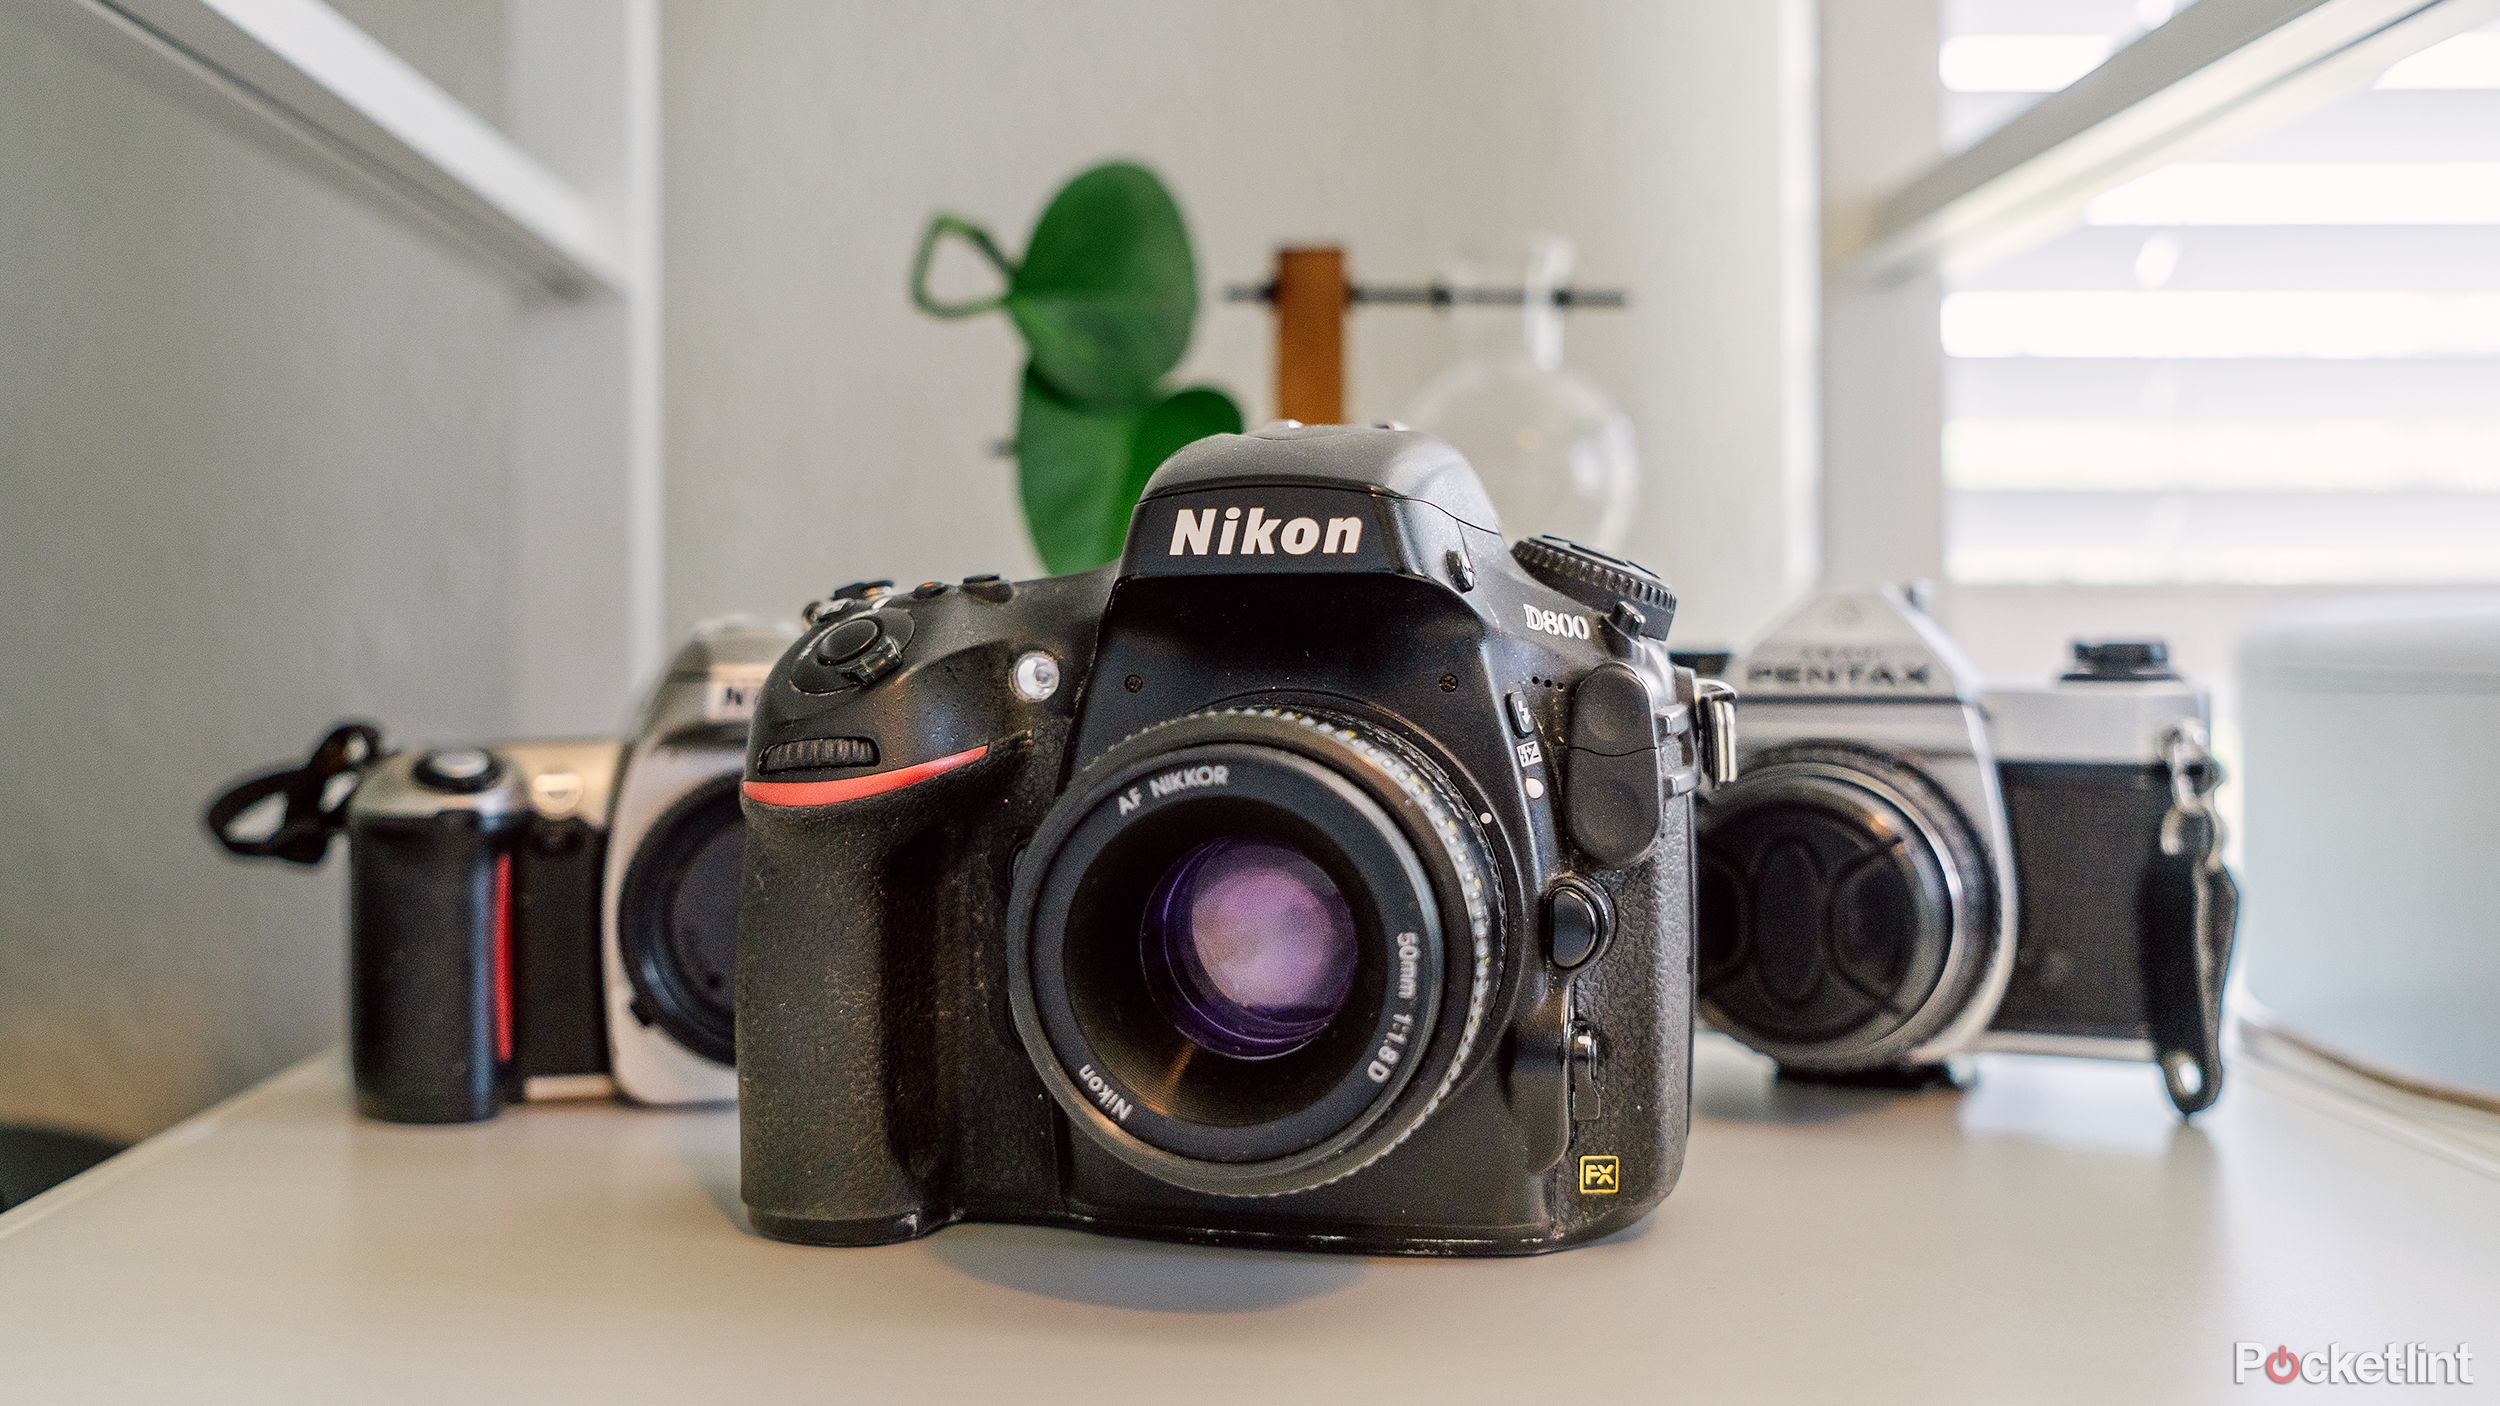 A Nikon D800 sits in front of two film cameras on a shelf. 